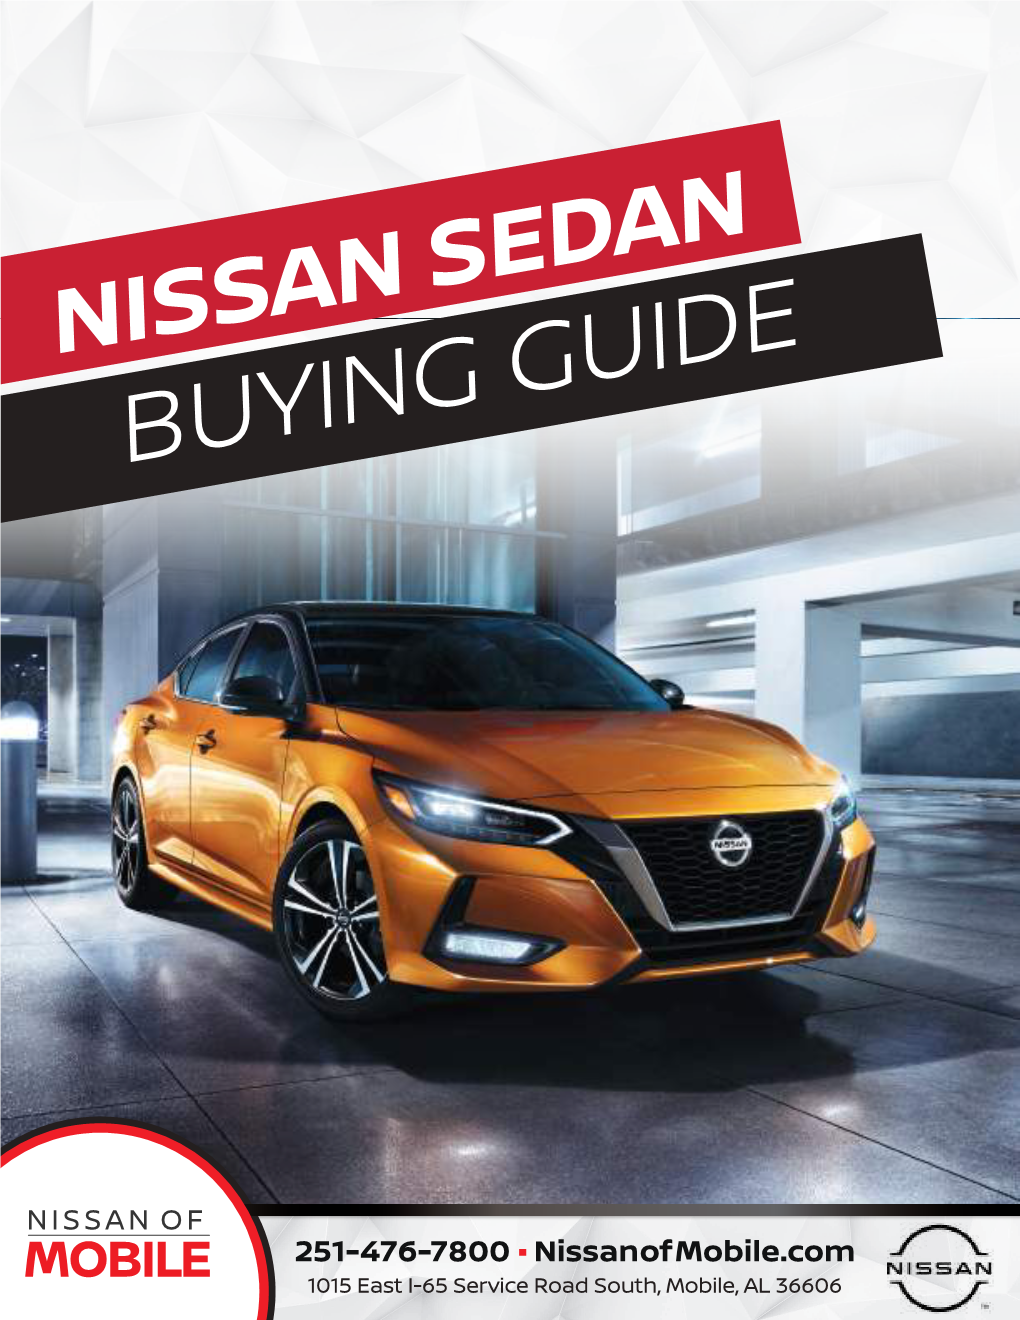 Buying Guide